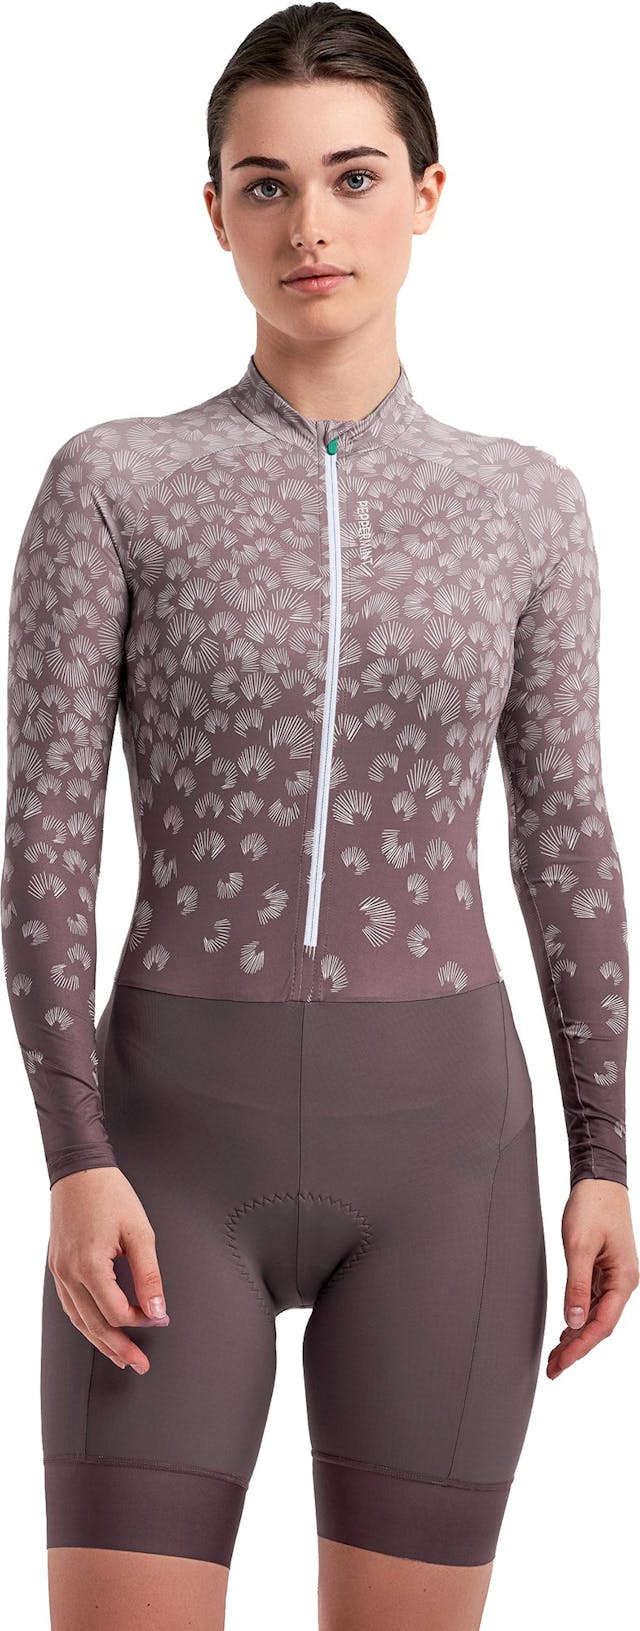 Product image for Signature Long Sleeve Skinsuit - Women's